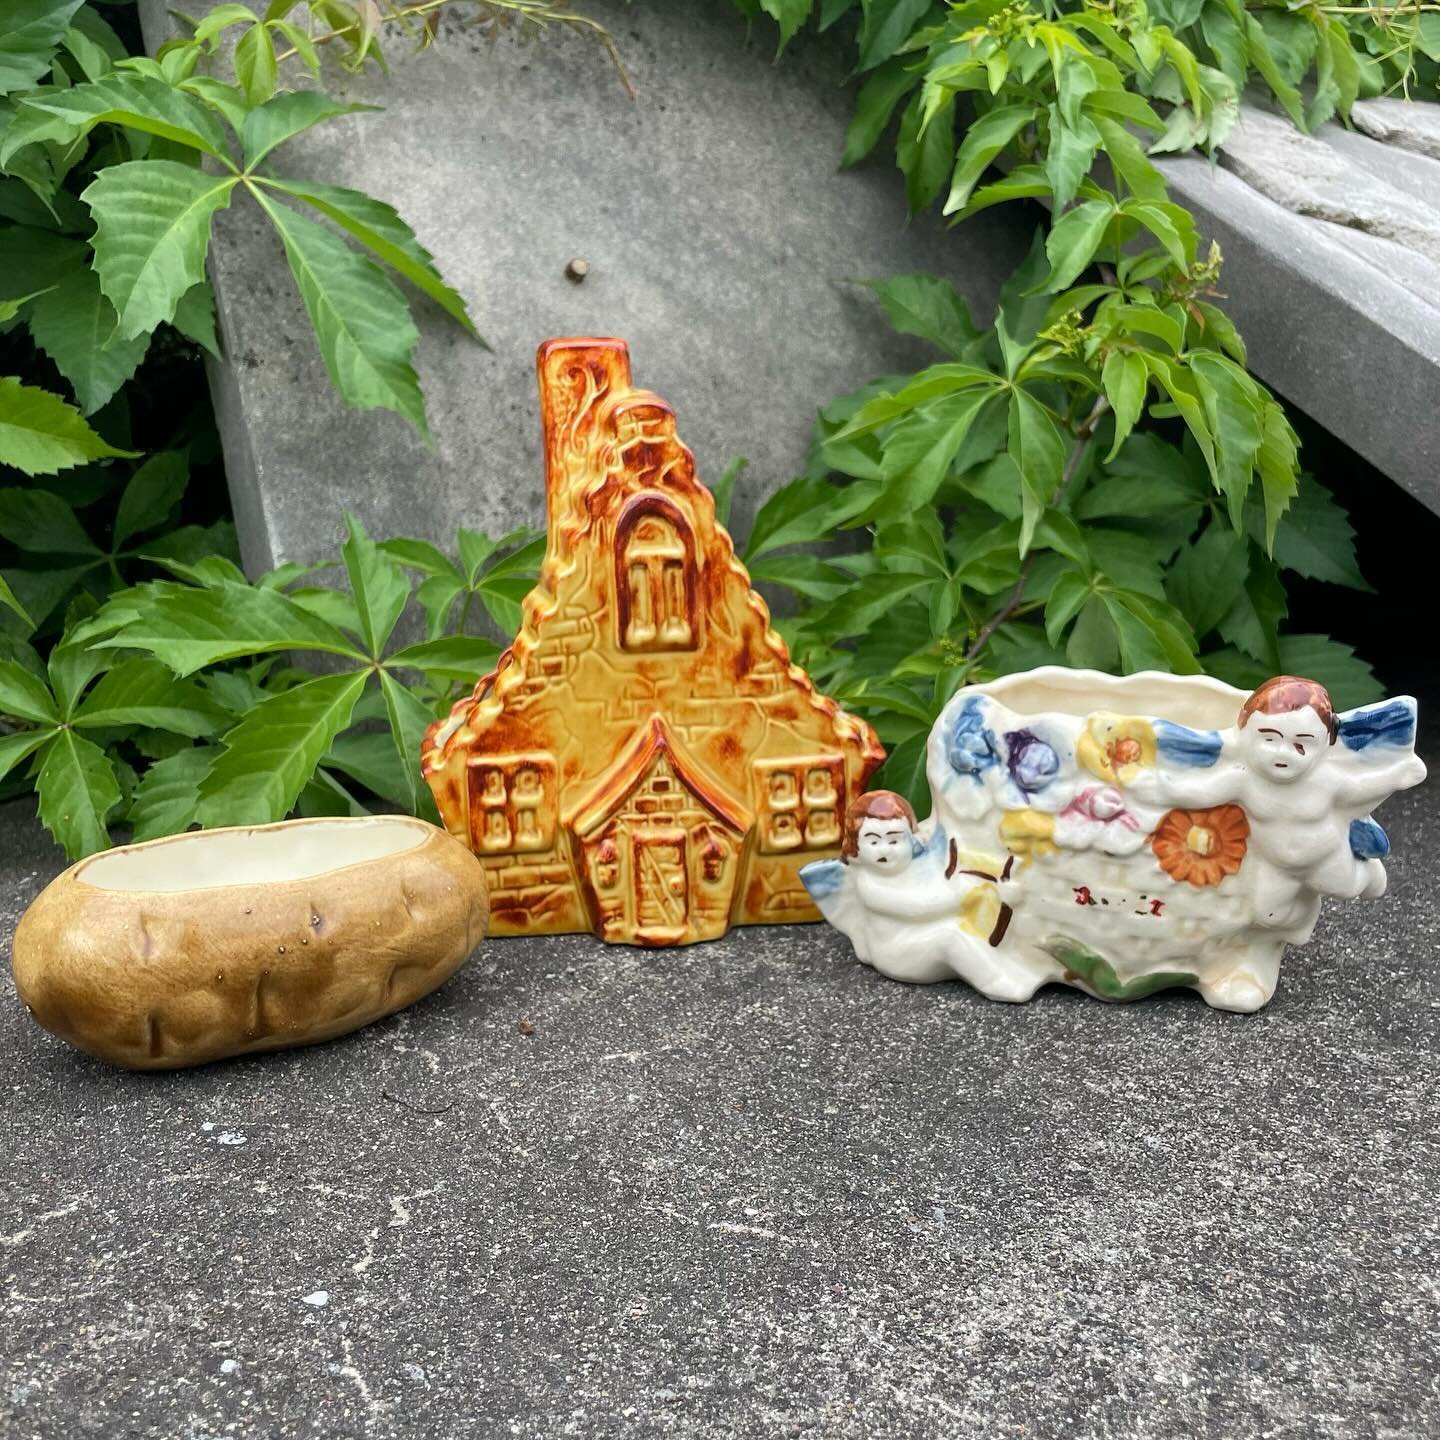 Planter party! The perfect lil addition to any Mother&rsquo;s Day gift 🪴 made in Japan cherub planter, 4.5&rdquo; tall, 8&rdquo; wide, $18. Handmade lusterware house planter and wall pocket, 8&rdquo; tall, 6.5&rdquo; wide, $69. Handmade potato, 2.5&